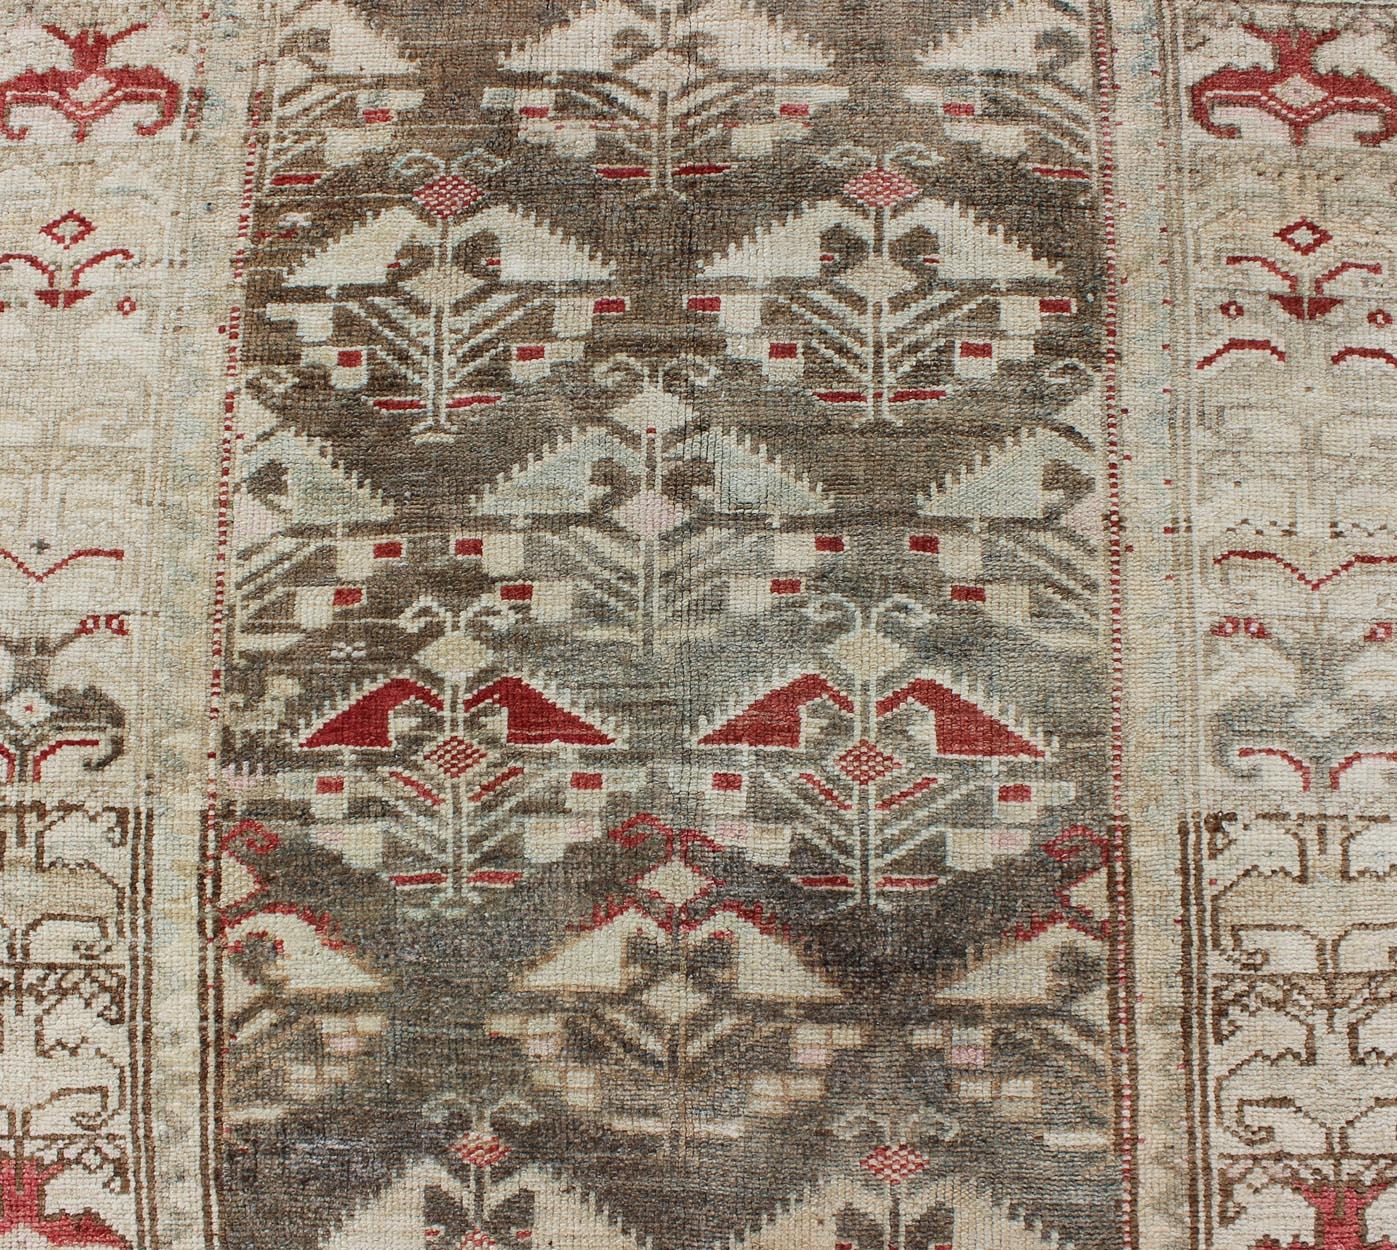 Wool Antique Persian Kurdish Runner with Repeating Geometric in Gray Green, Neutrals